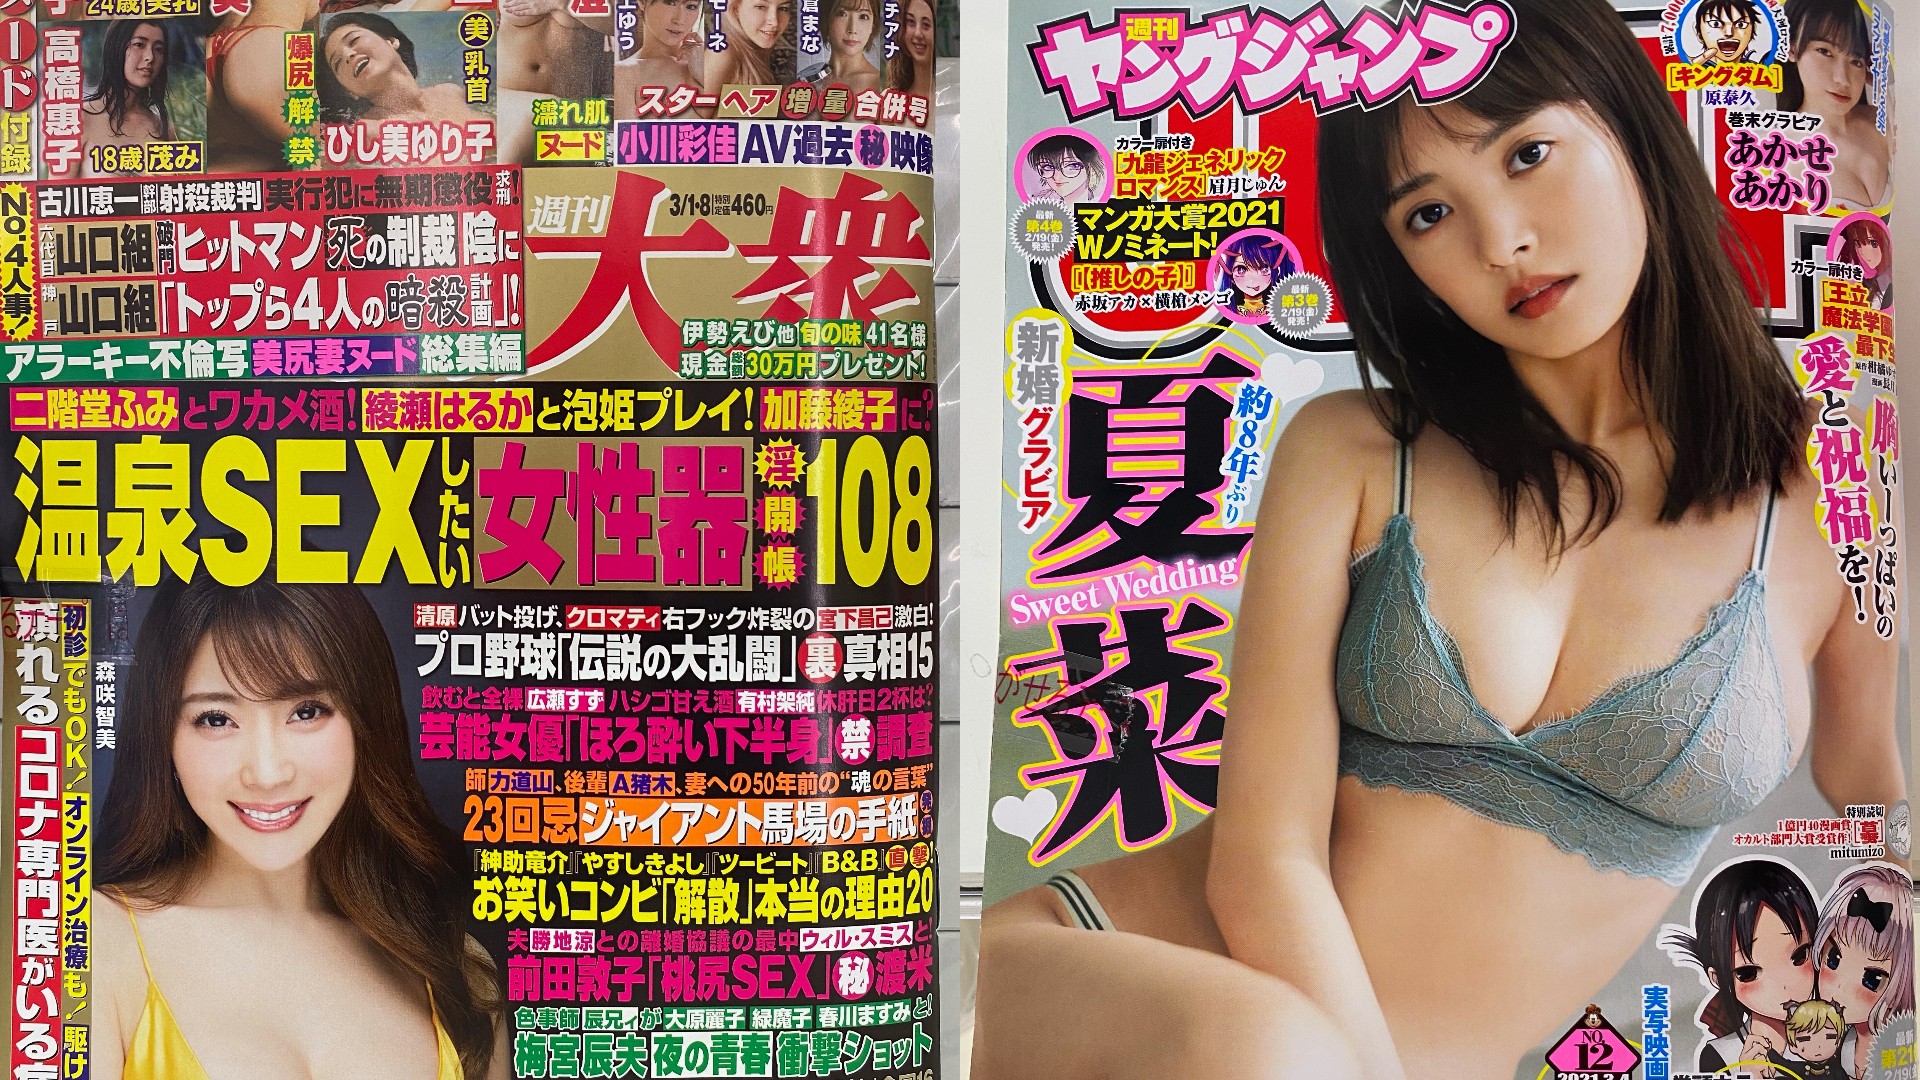 Japan Porno Magazine - Who Buys Porn Magazines Anymore? We Asked the Editor of One | Flipboard